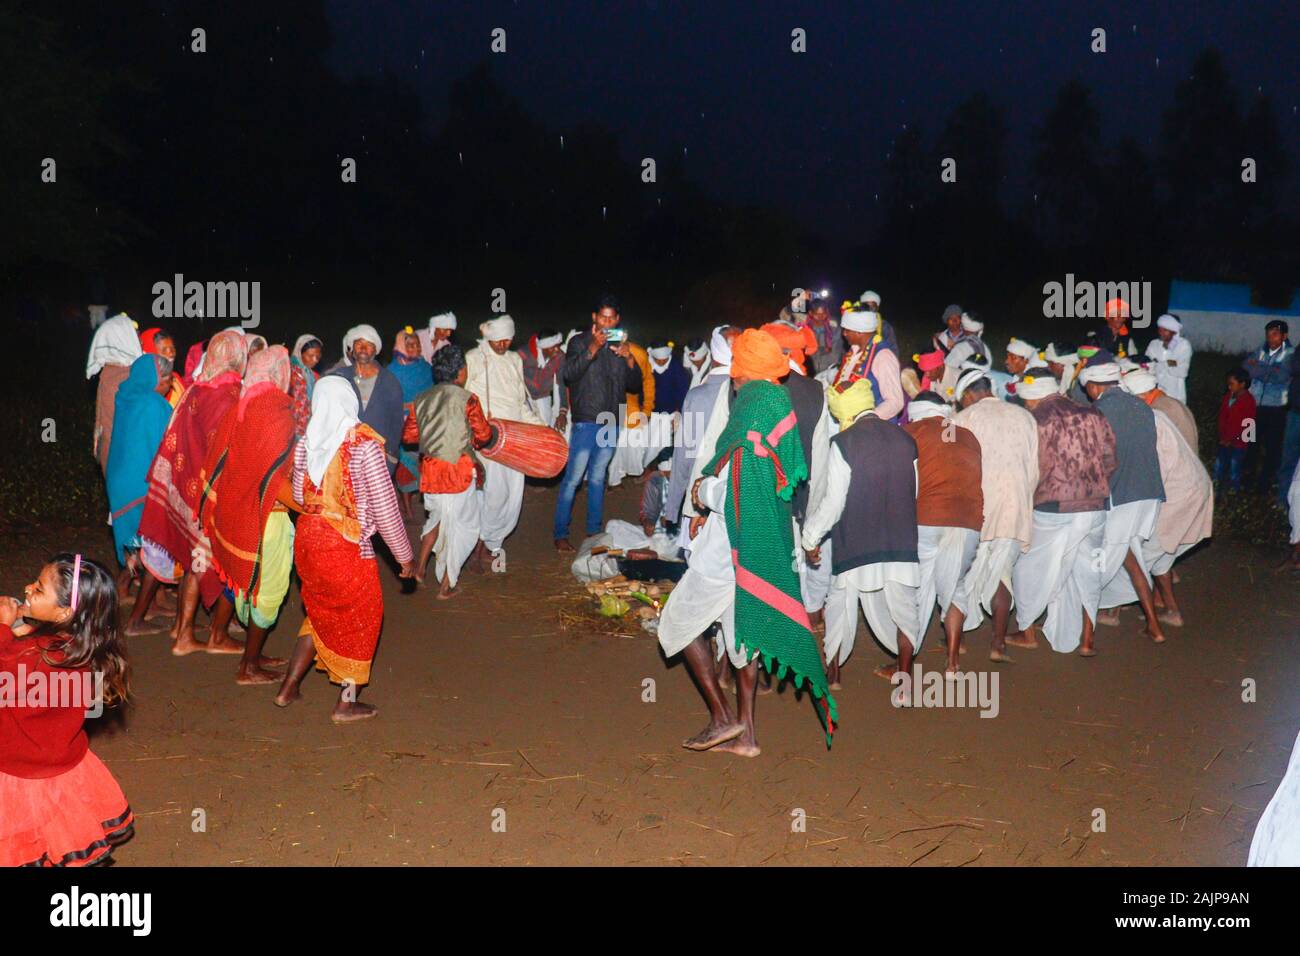 MADHYA PRADESH / INDIA / DECEMBER 15, 2019 : The traditional folk dance of the Indian tribal people, in which groups of women and men dance by making Stock Photo